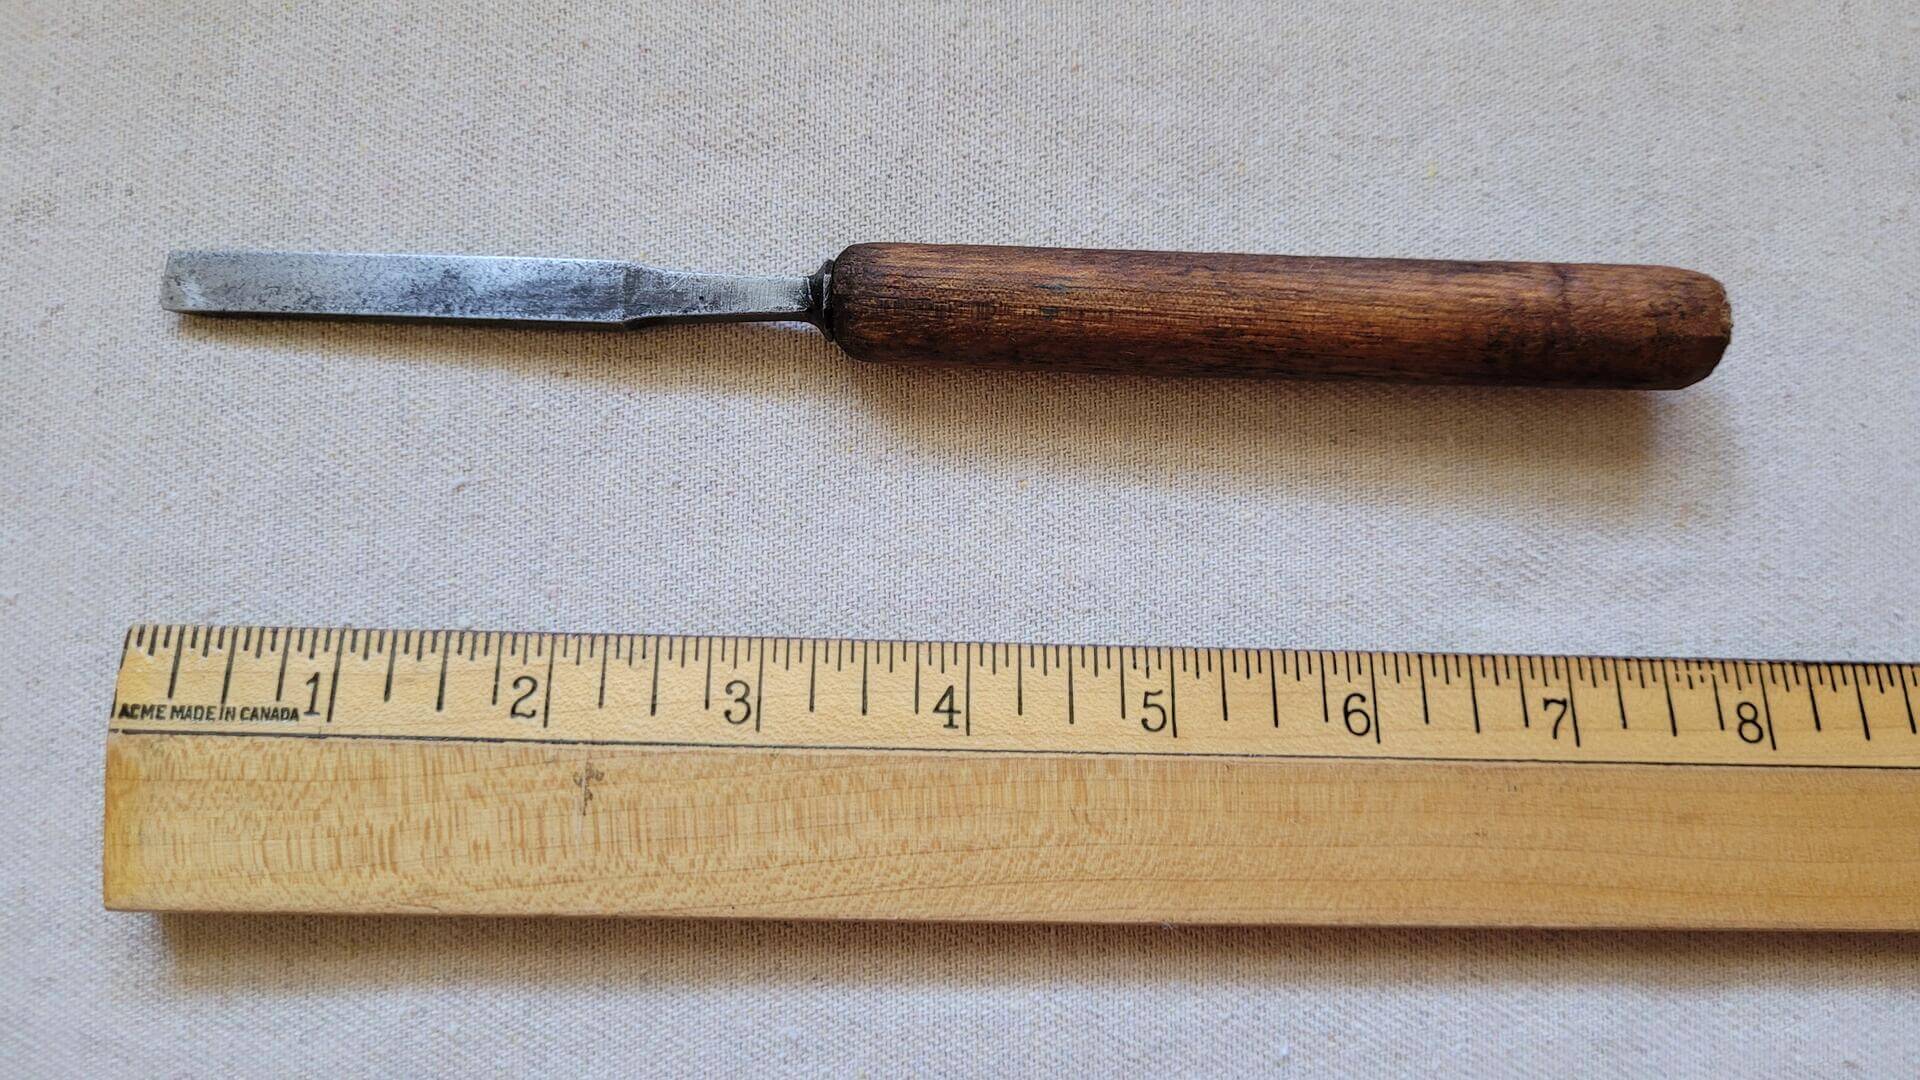 j-howarth-quarter-inch-wood-carving-firmer-tang-chisel-sheffield-vintage-antique-19th-century-,ade-in-england-collectible-woodworking-carpentry-edge-tools-measurements